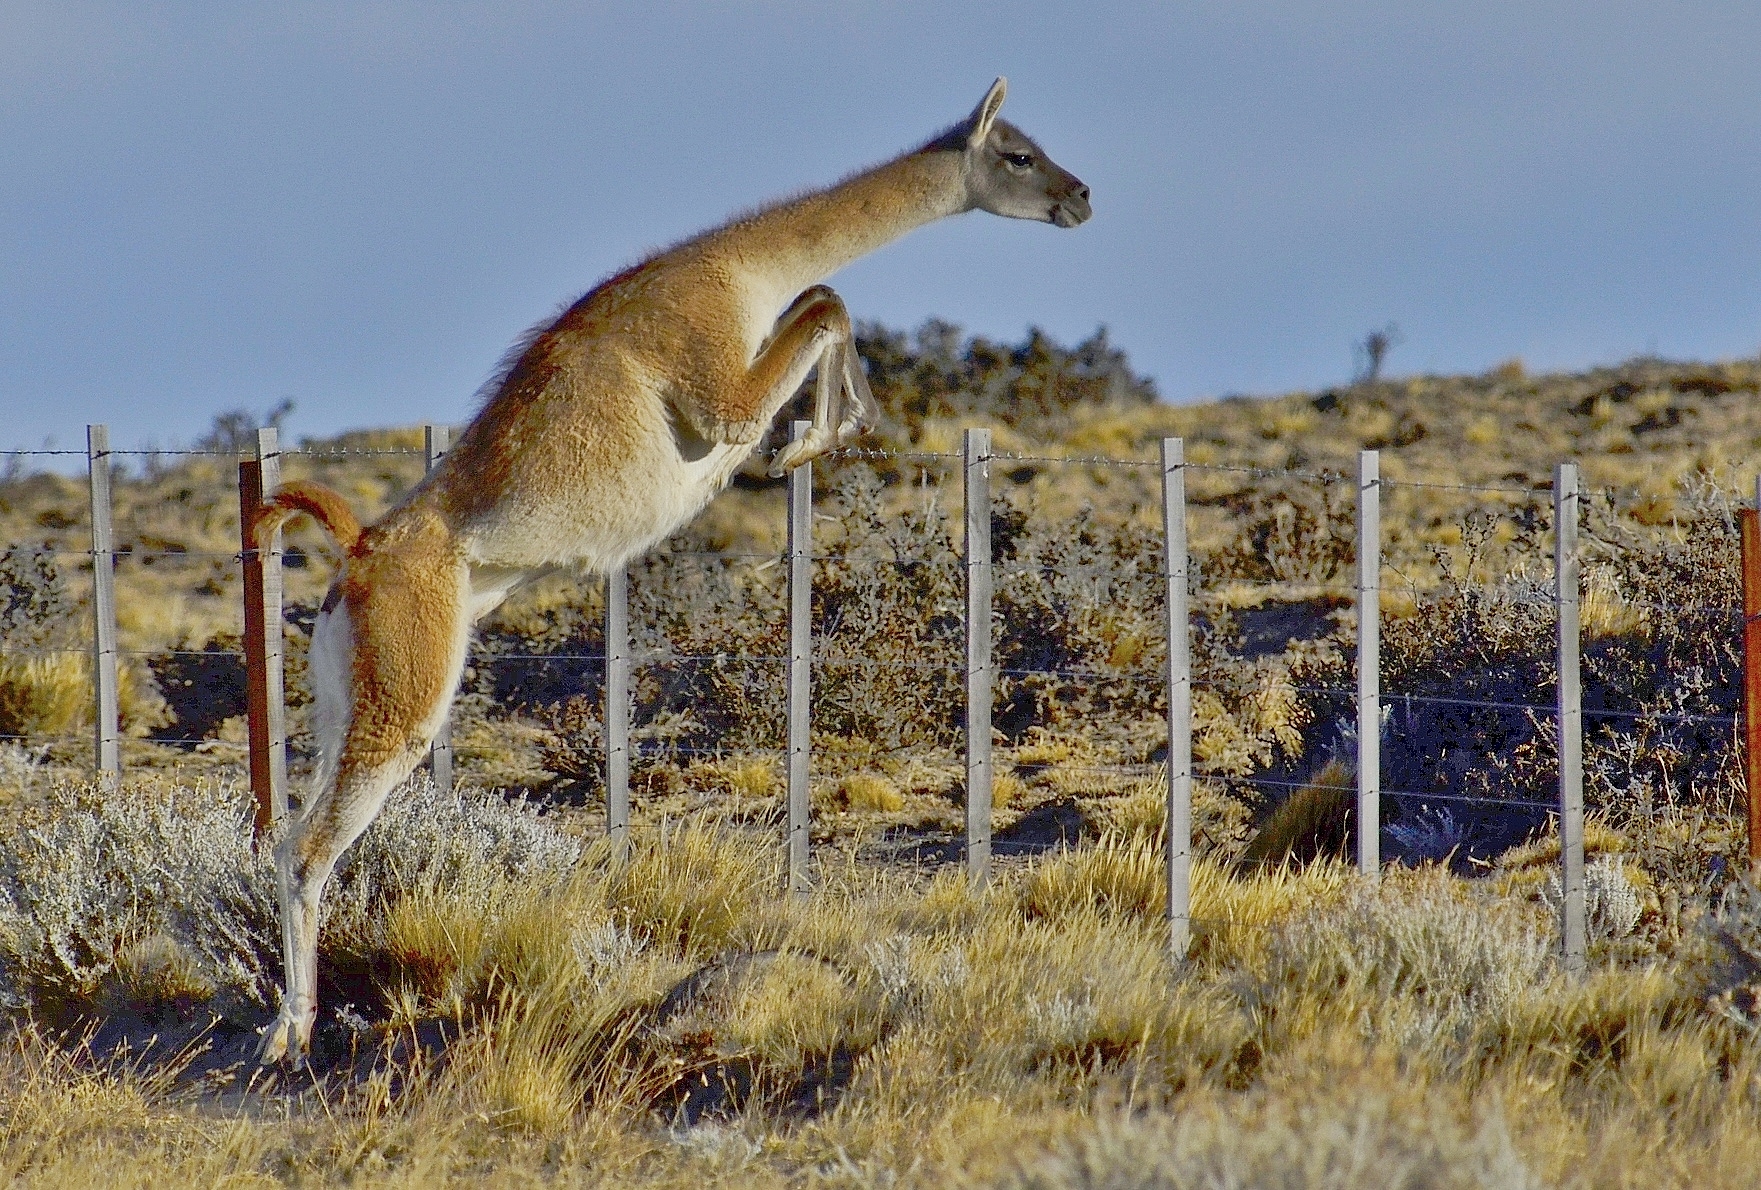 The jump of the guanaco...